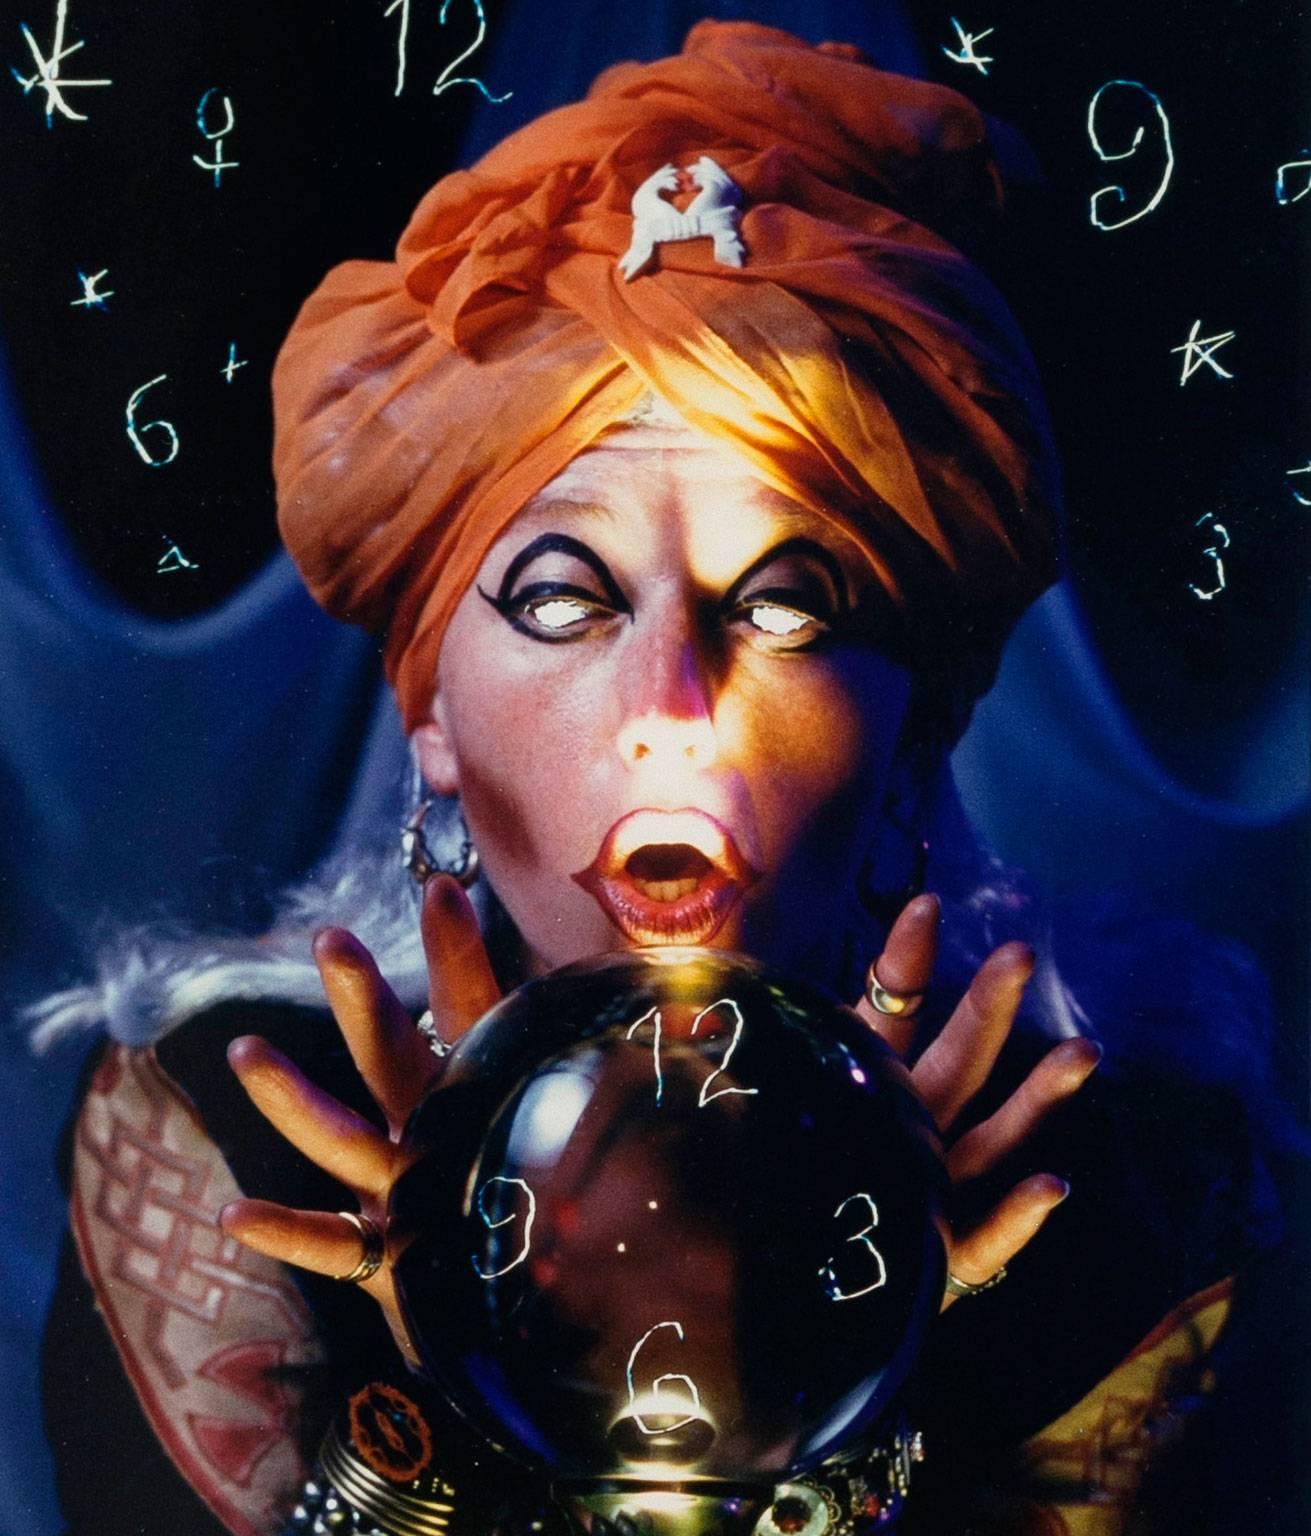 Untitled (Fortune Teller) - Contemporary Photograph by Cindy Sherman